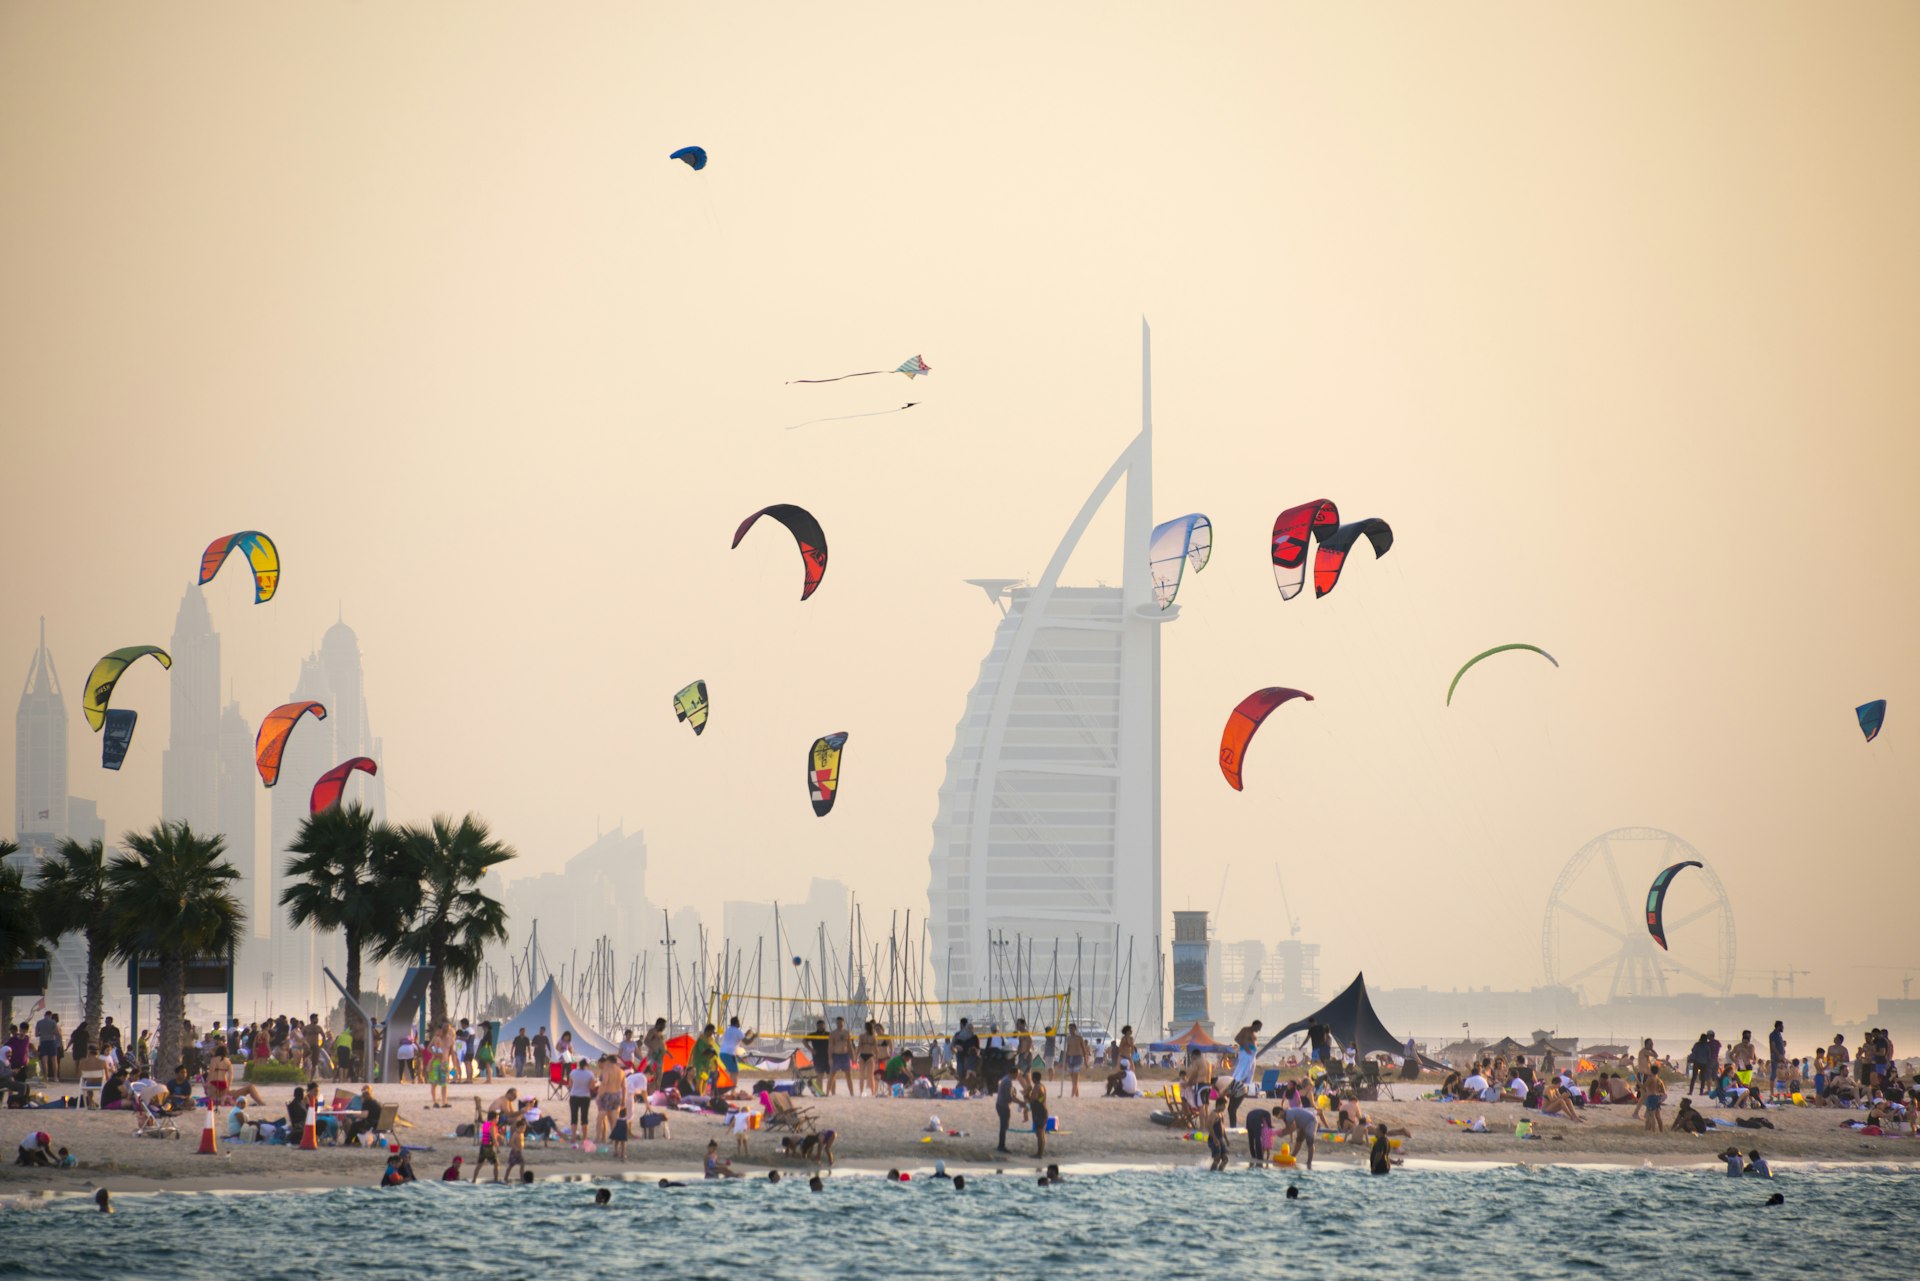 A kite beach full of kite surfers in Jumeirah with the Burj Al Arab in the background.